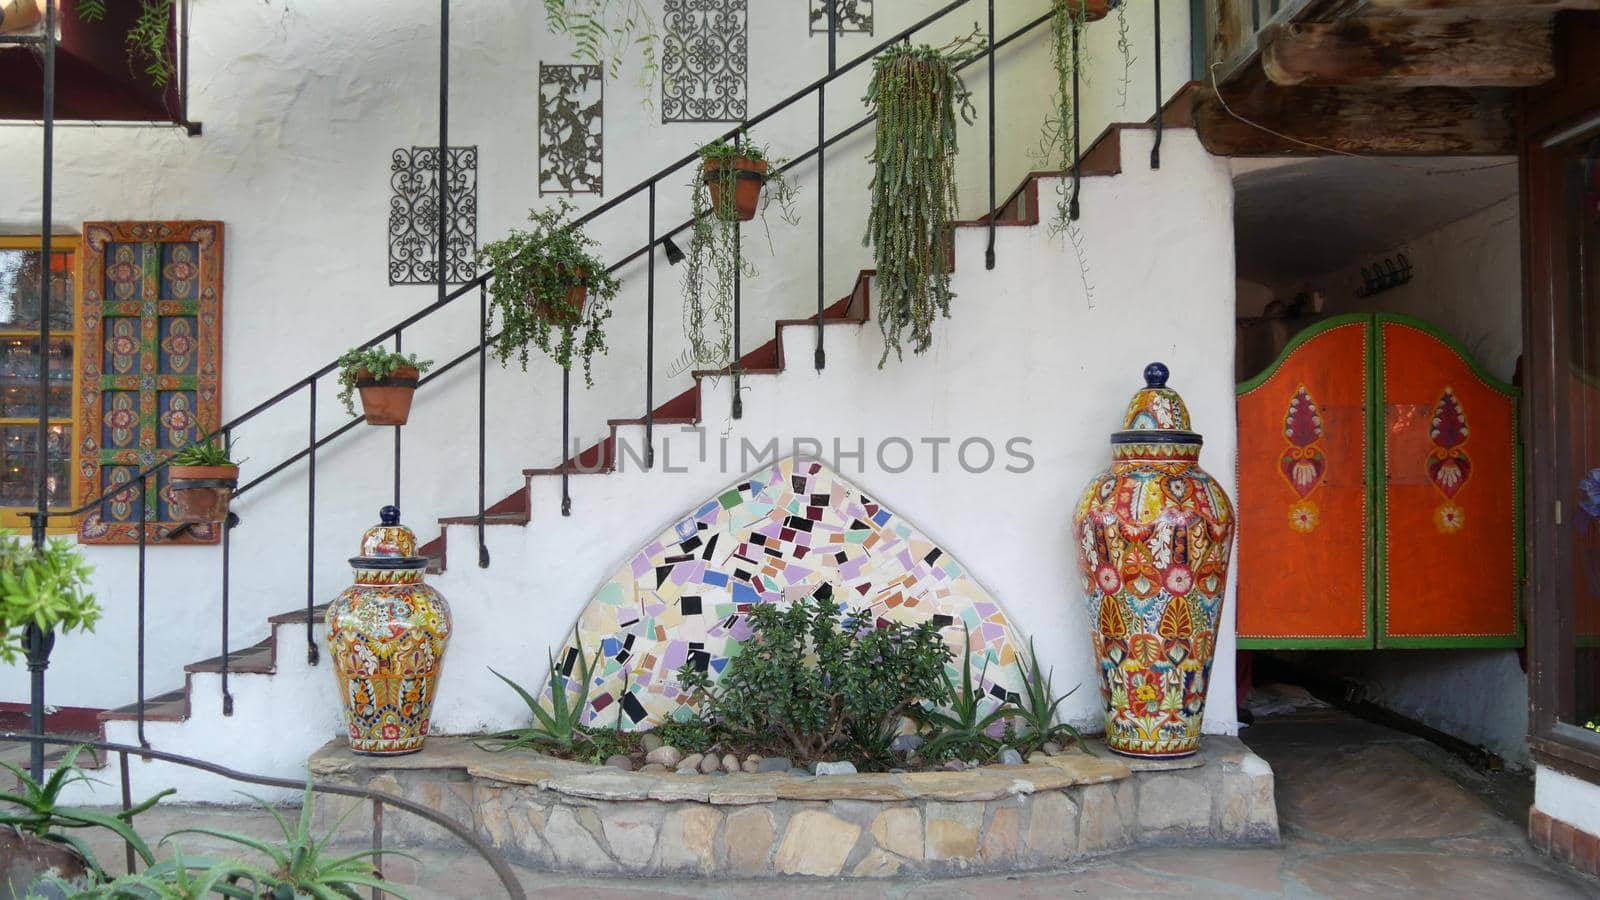 Mexican garden design in front yard, colorful ceramic painted decor, window, stairs and succulent plants in clay flower pots. Ethnic latin white house exterior, rural patio or terrace in latino style.